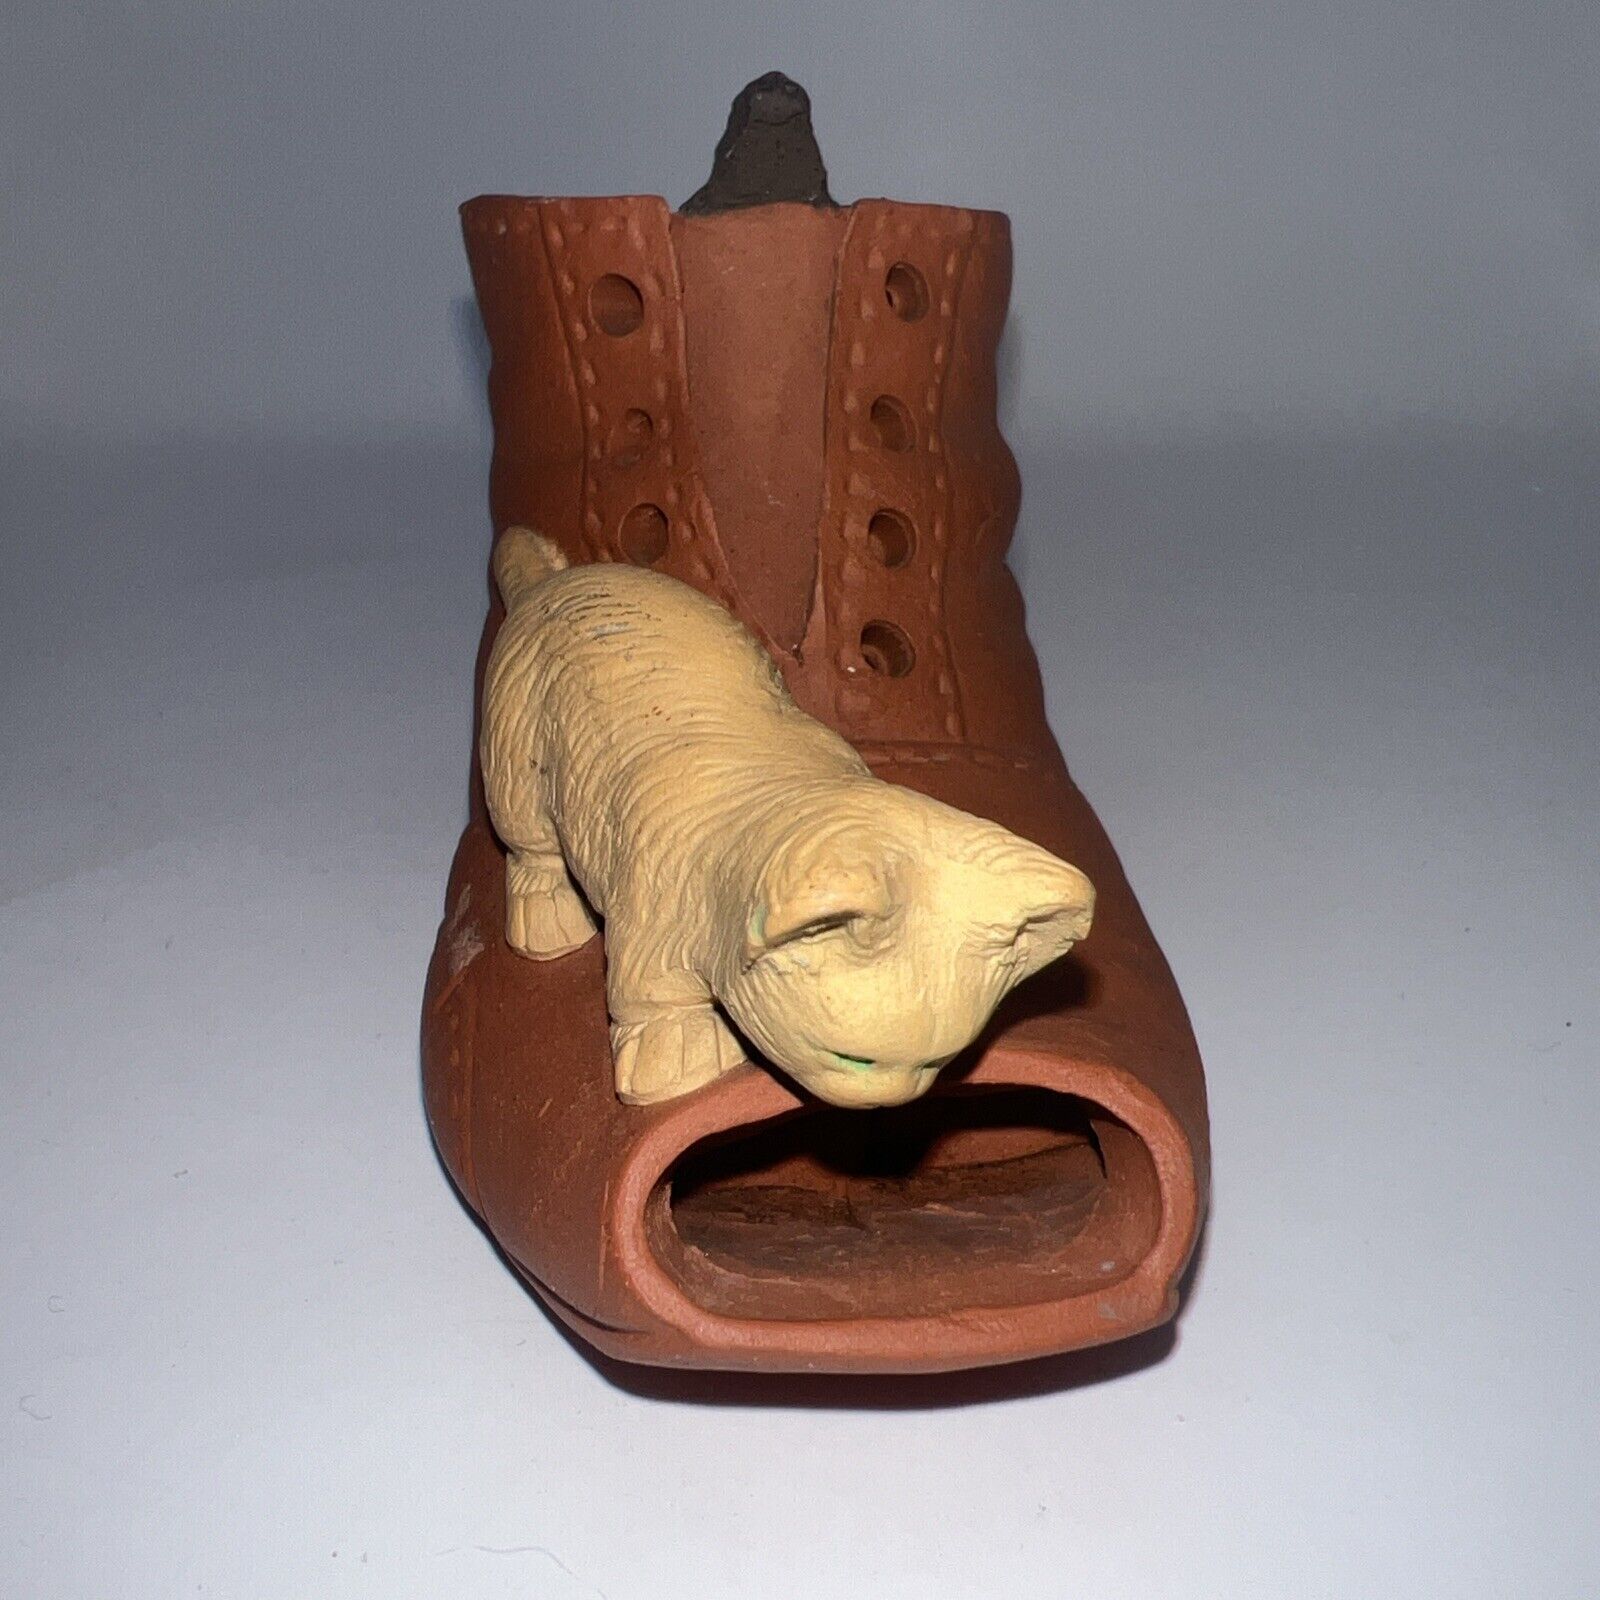 VTG Ceramic Pottery Figurine Cat And Mouse Playing On Shoe 4.5” X 2”